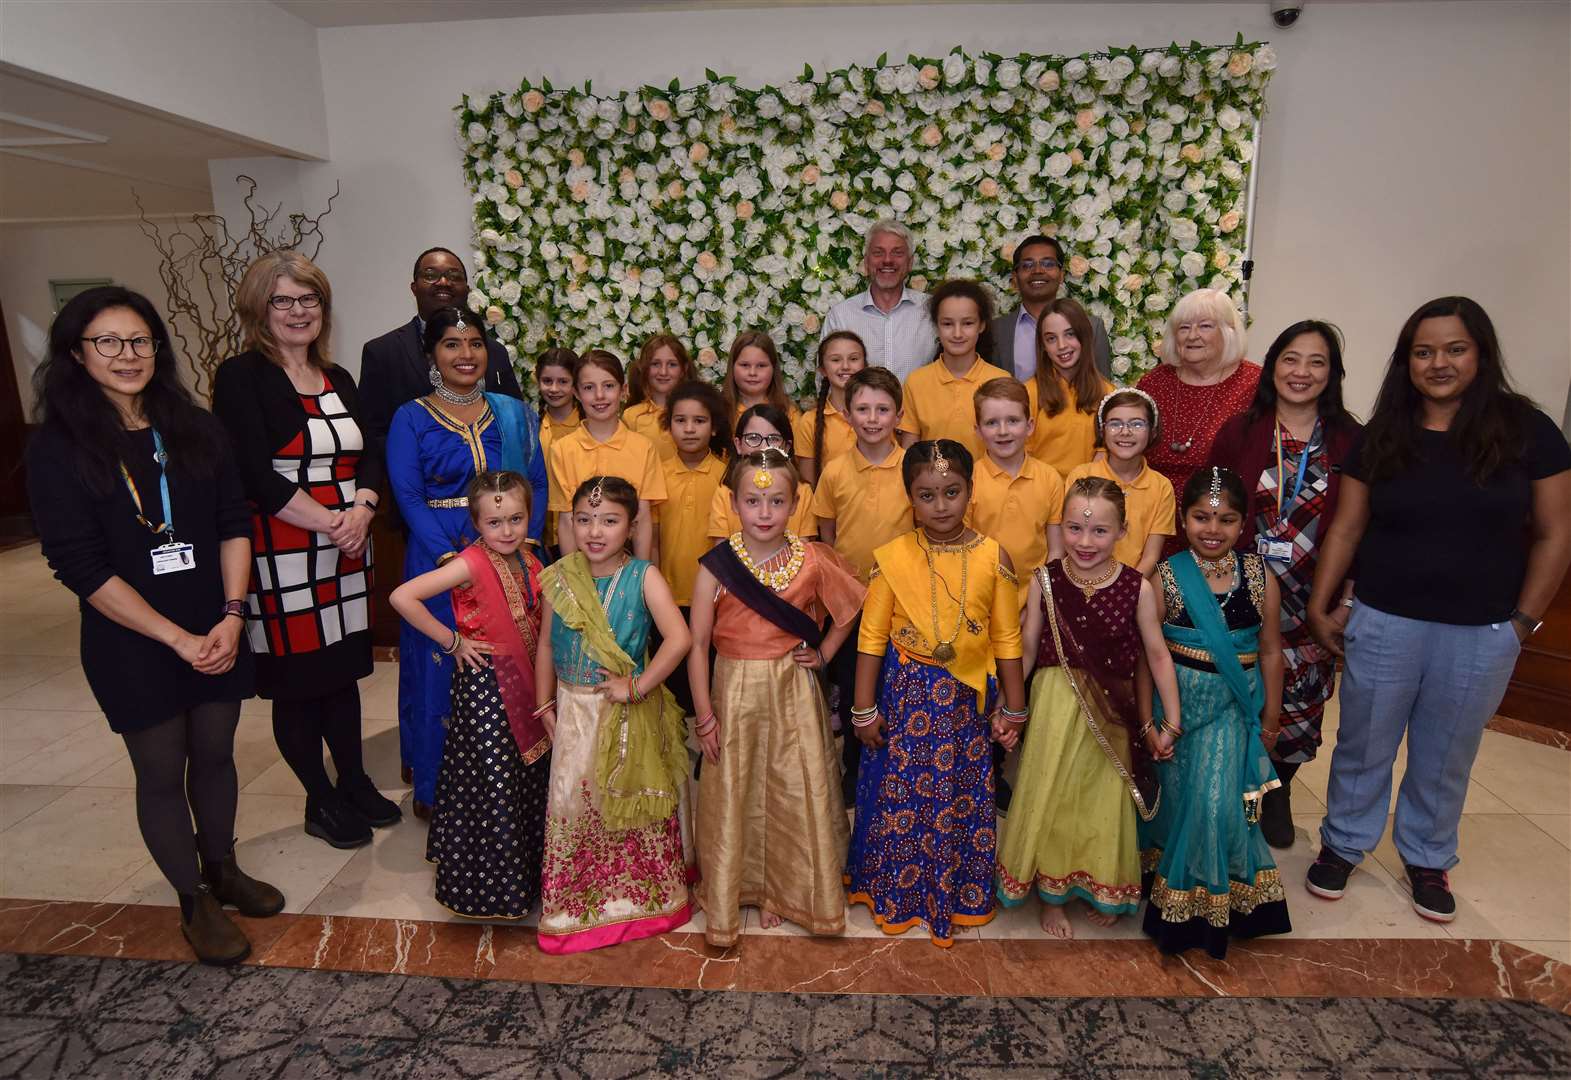 NHS Grampian's maiden diversity festival took place on Wednesday.